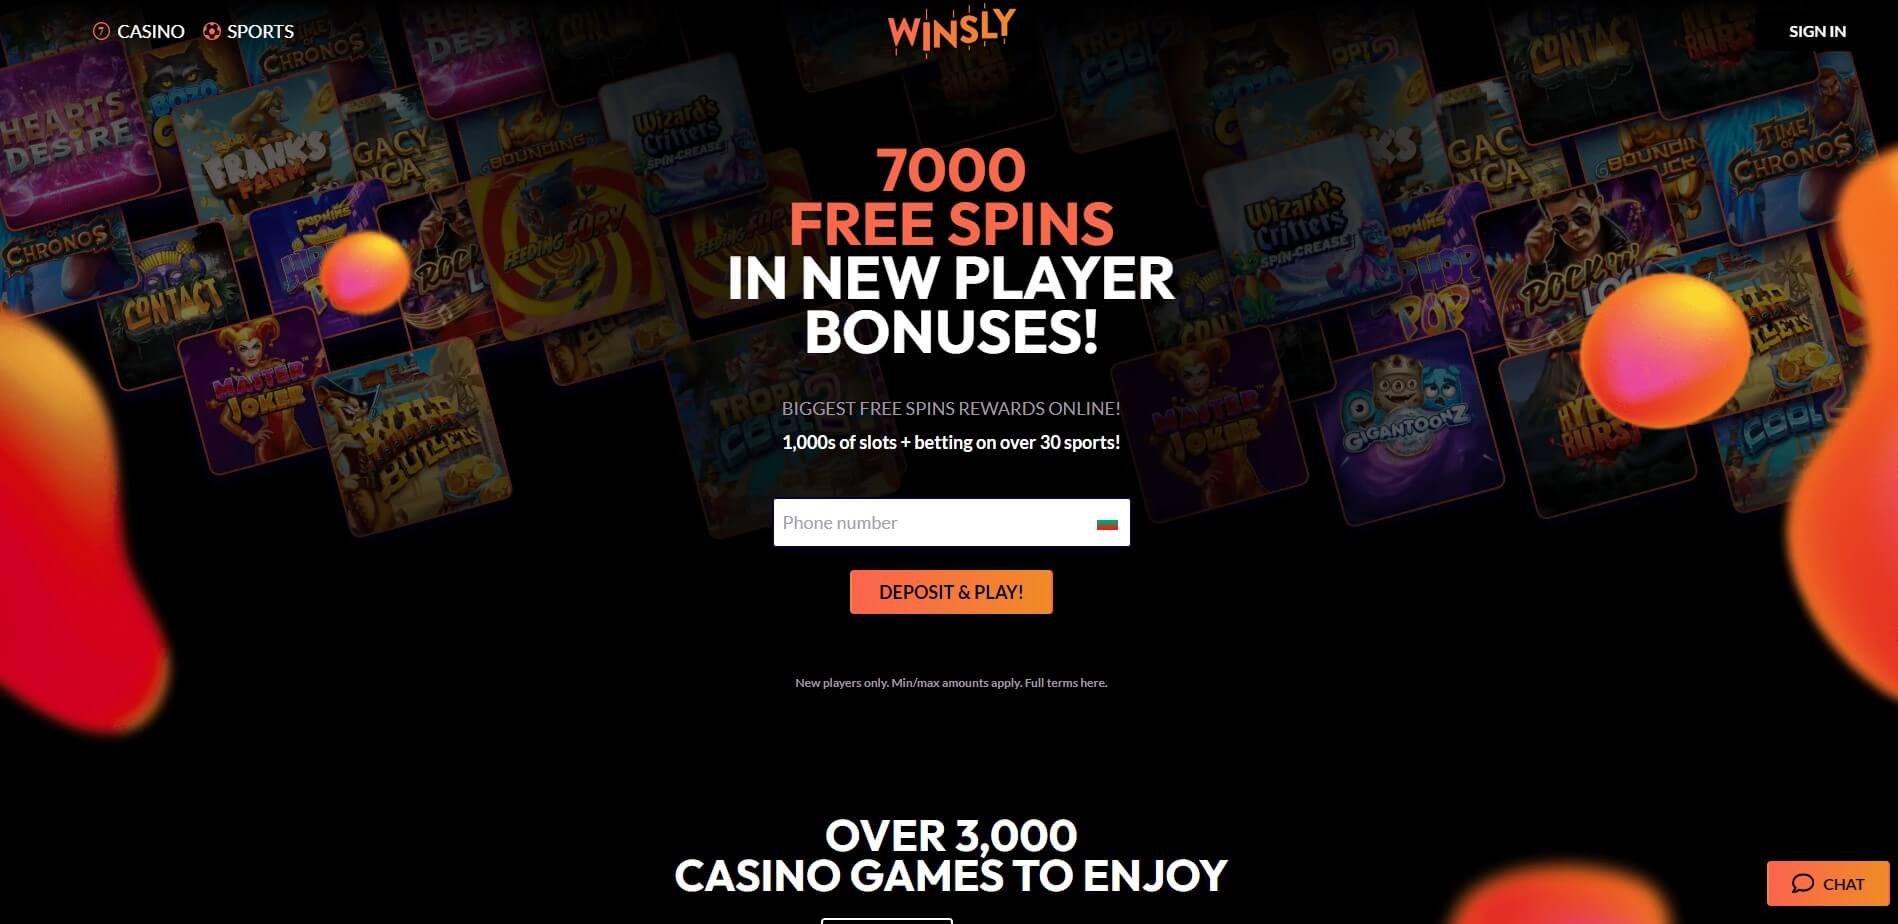 Winsly Casino Review